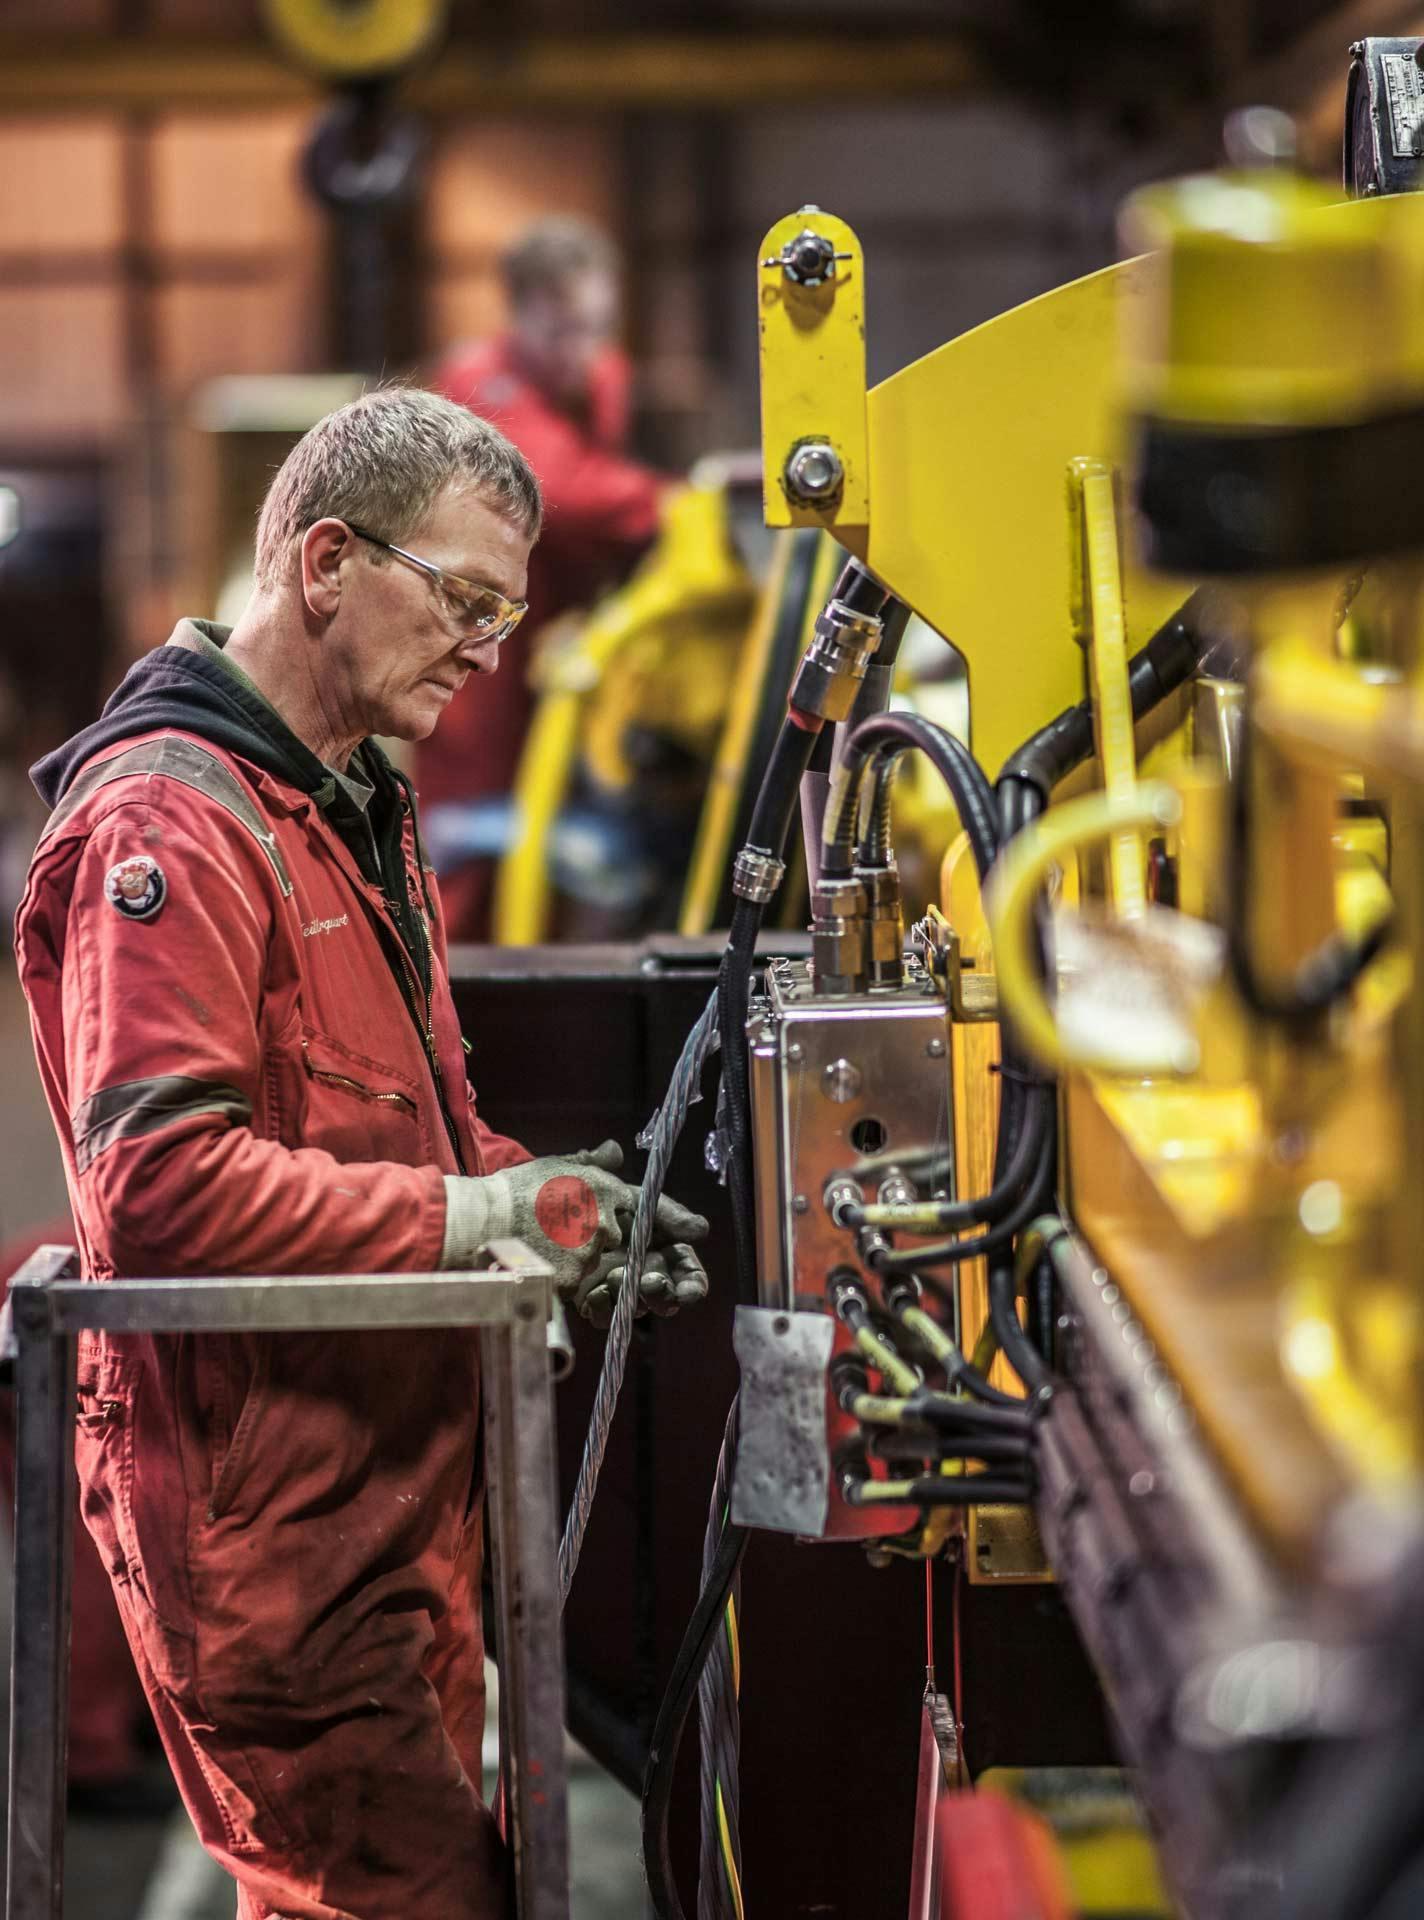 Service and repair technician in our service center working on drilling equipment